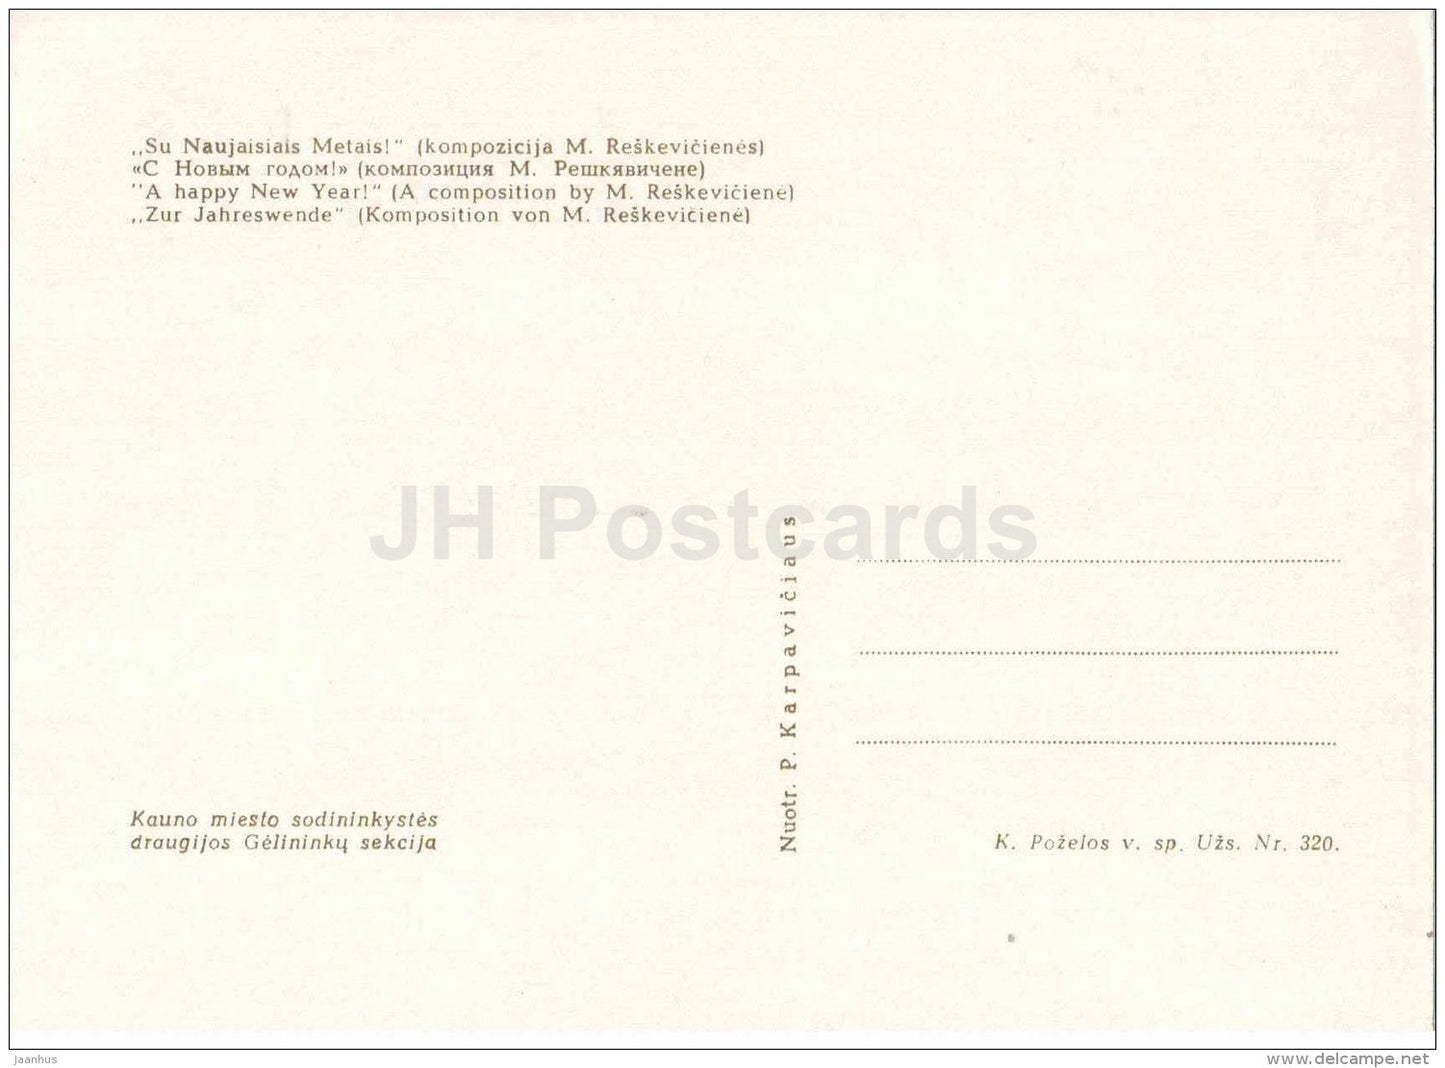 flower composition Happy New Year - candle - cone - 1963 - Lithuania USSR - unused - JH Postcards